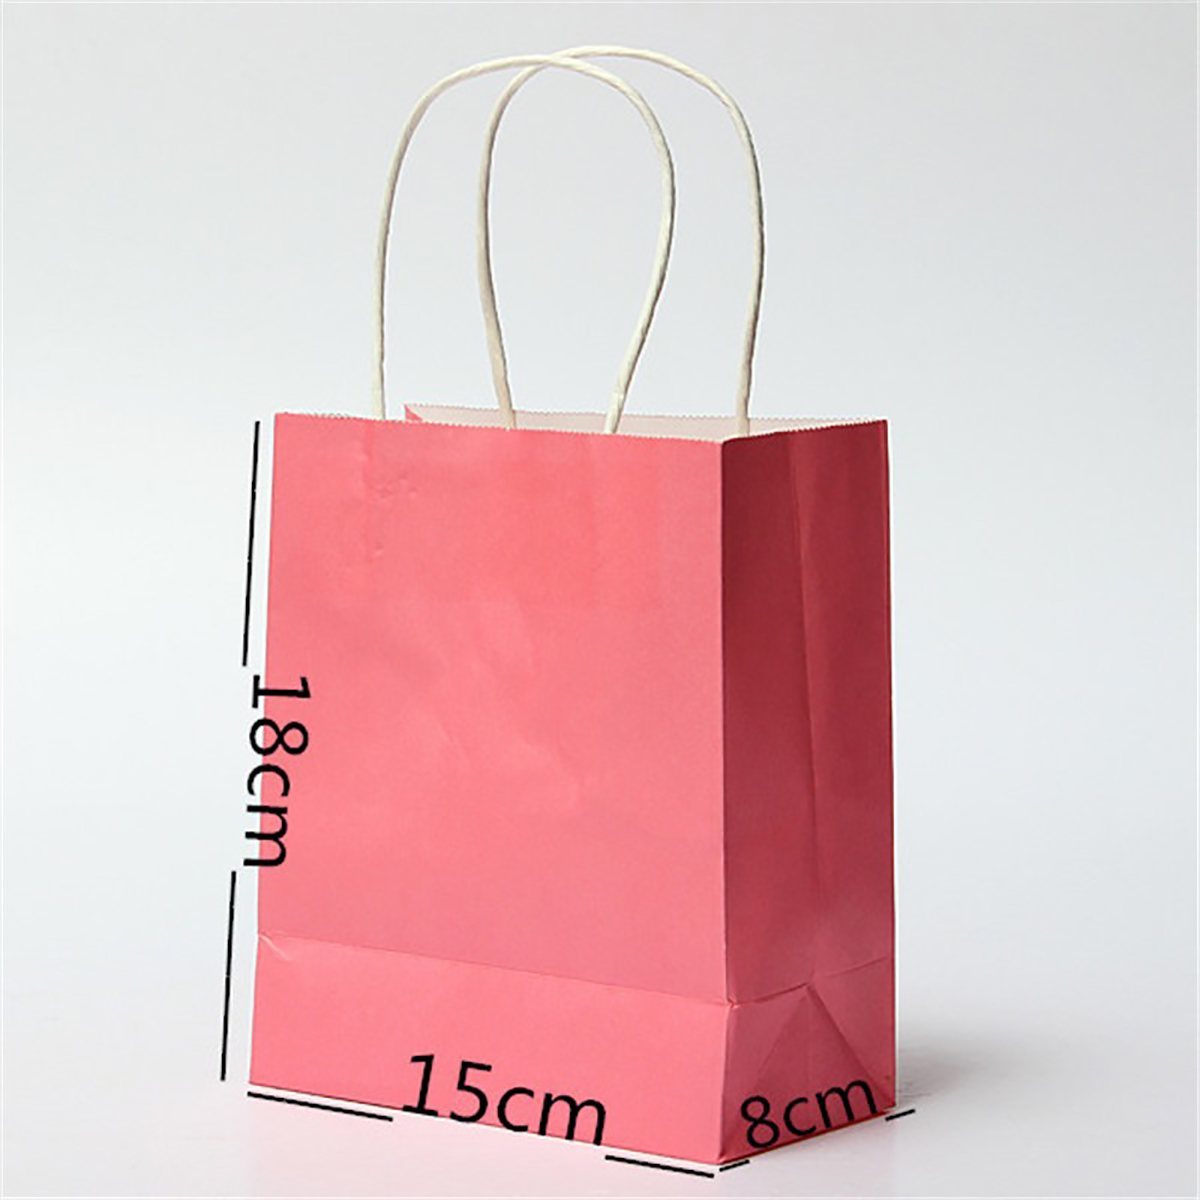 Colorful-Kraft-Paper-Gift-Bag-Wedding-Party-Handle-Paper-Gift-Bags-987091-9